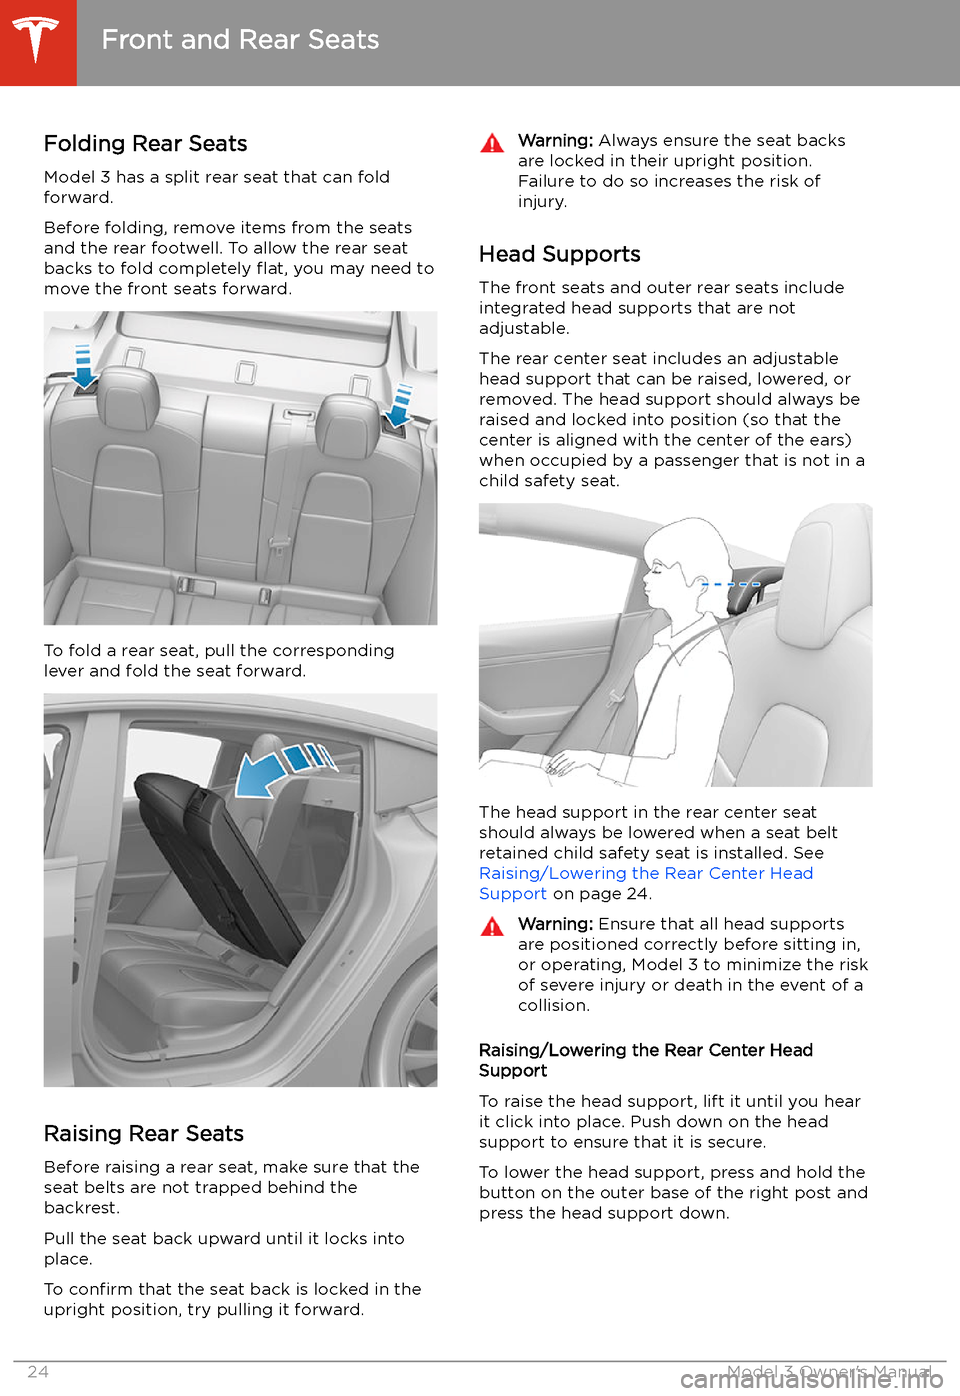 TESLA MODEL 3 2019   (Europe) Owners Guide Folding Rear Seats
Model 3 has a split rear seat that can fold
forward.
Before folding, remove items from the seats
and the rear footwell. To allow the rear seat
backs to fold completely  